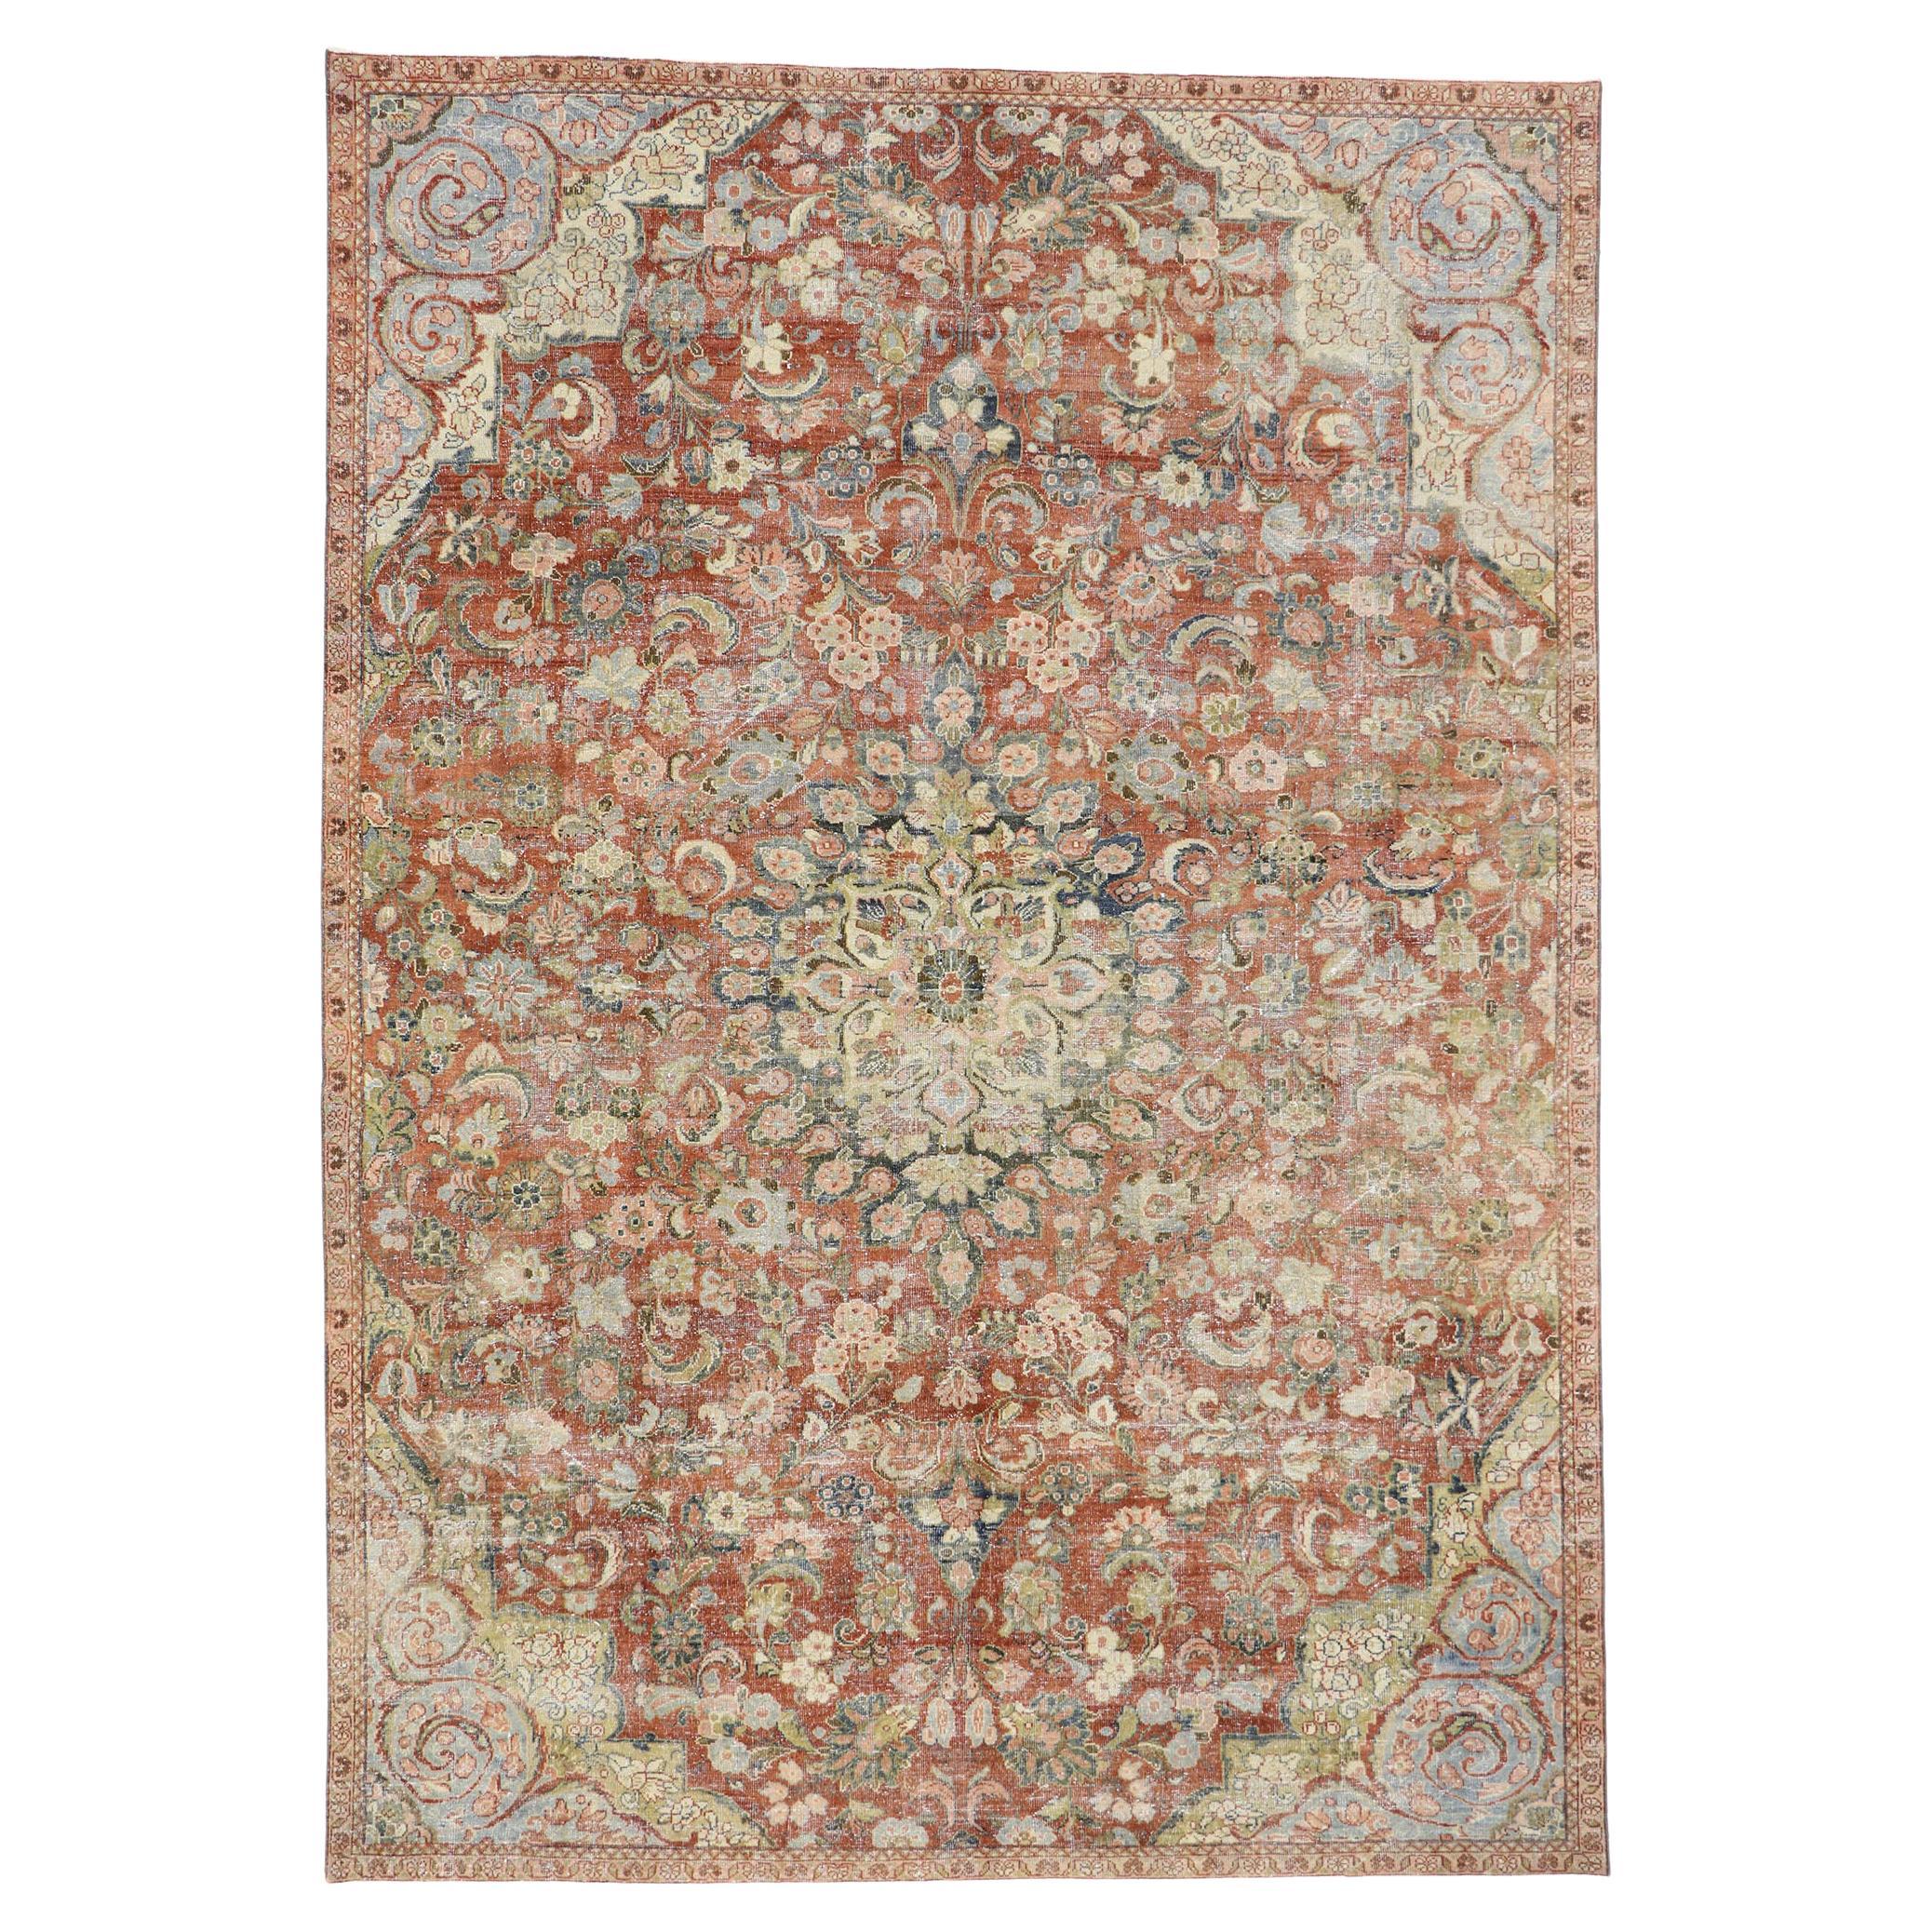 Distressed Antique Persian Mahal Rug with Rustic Style